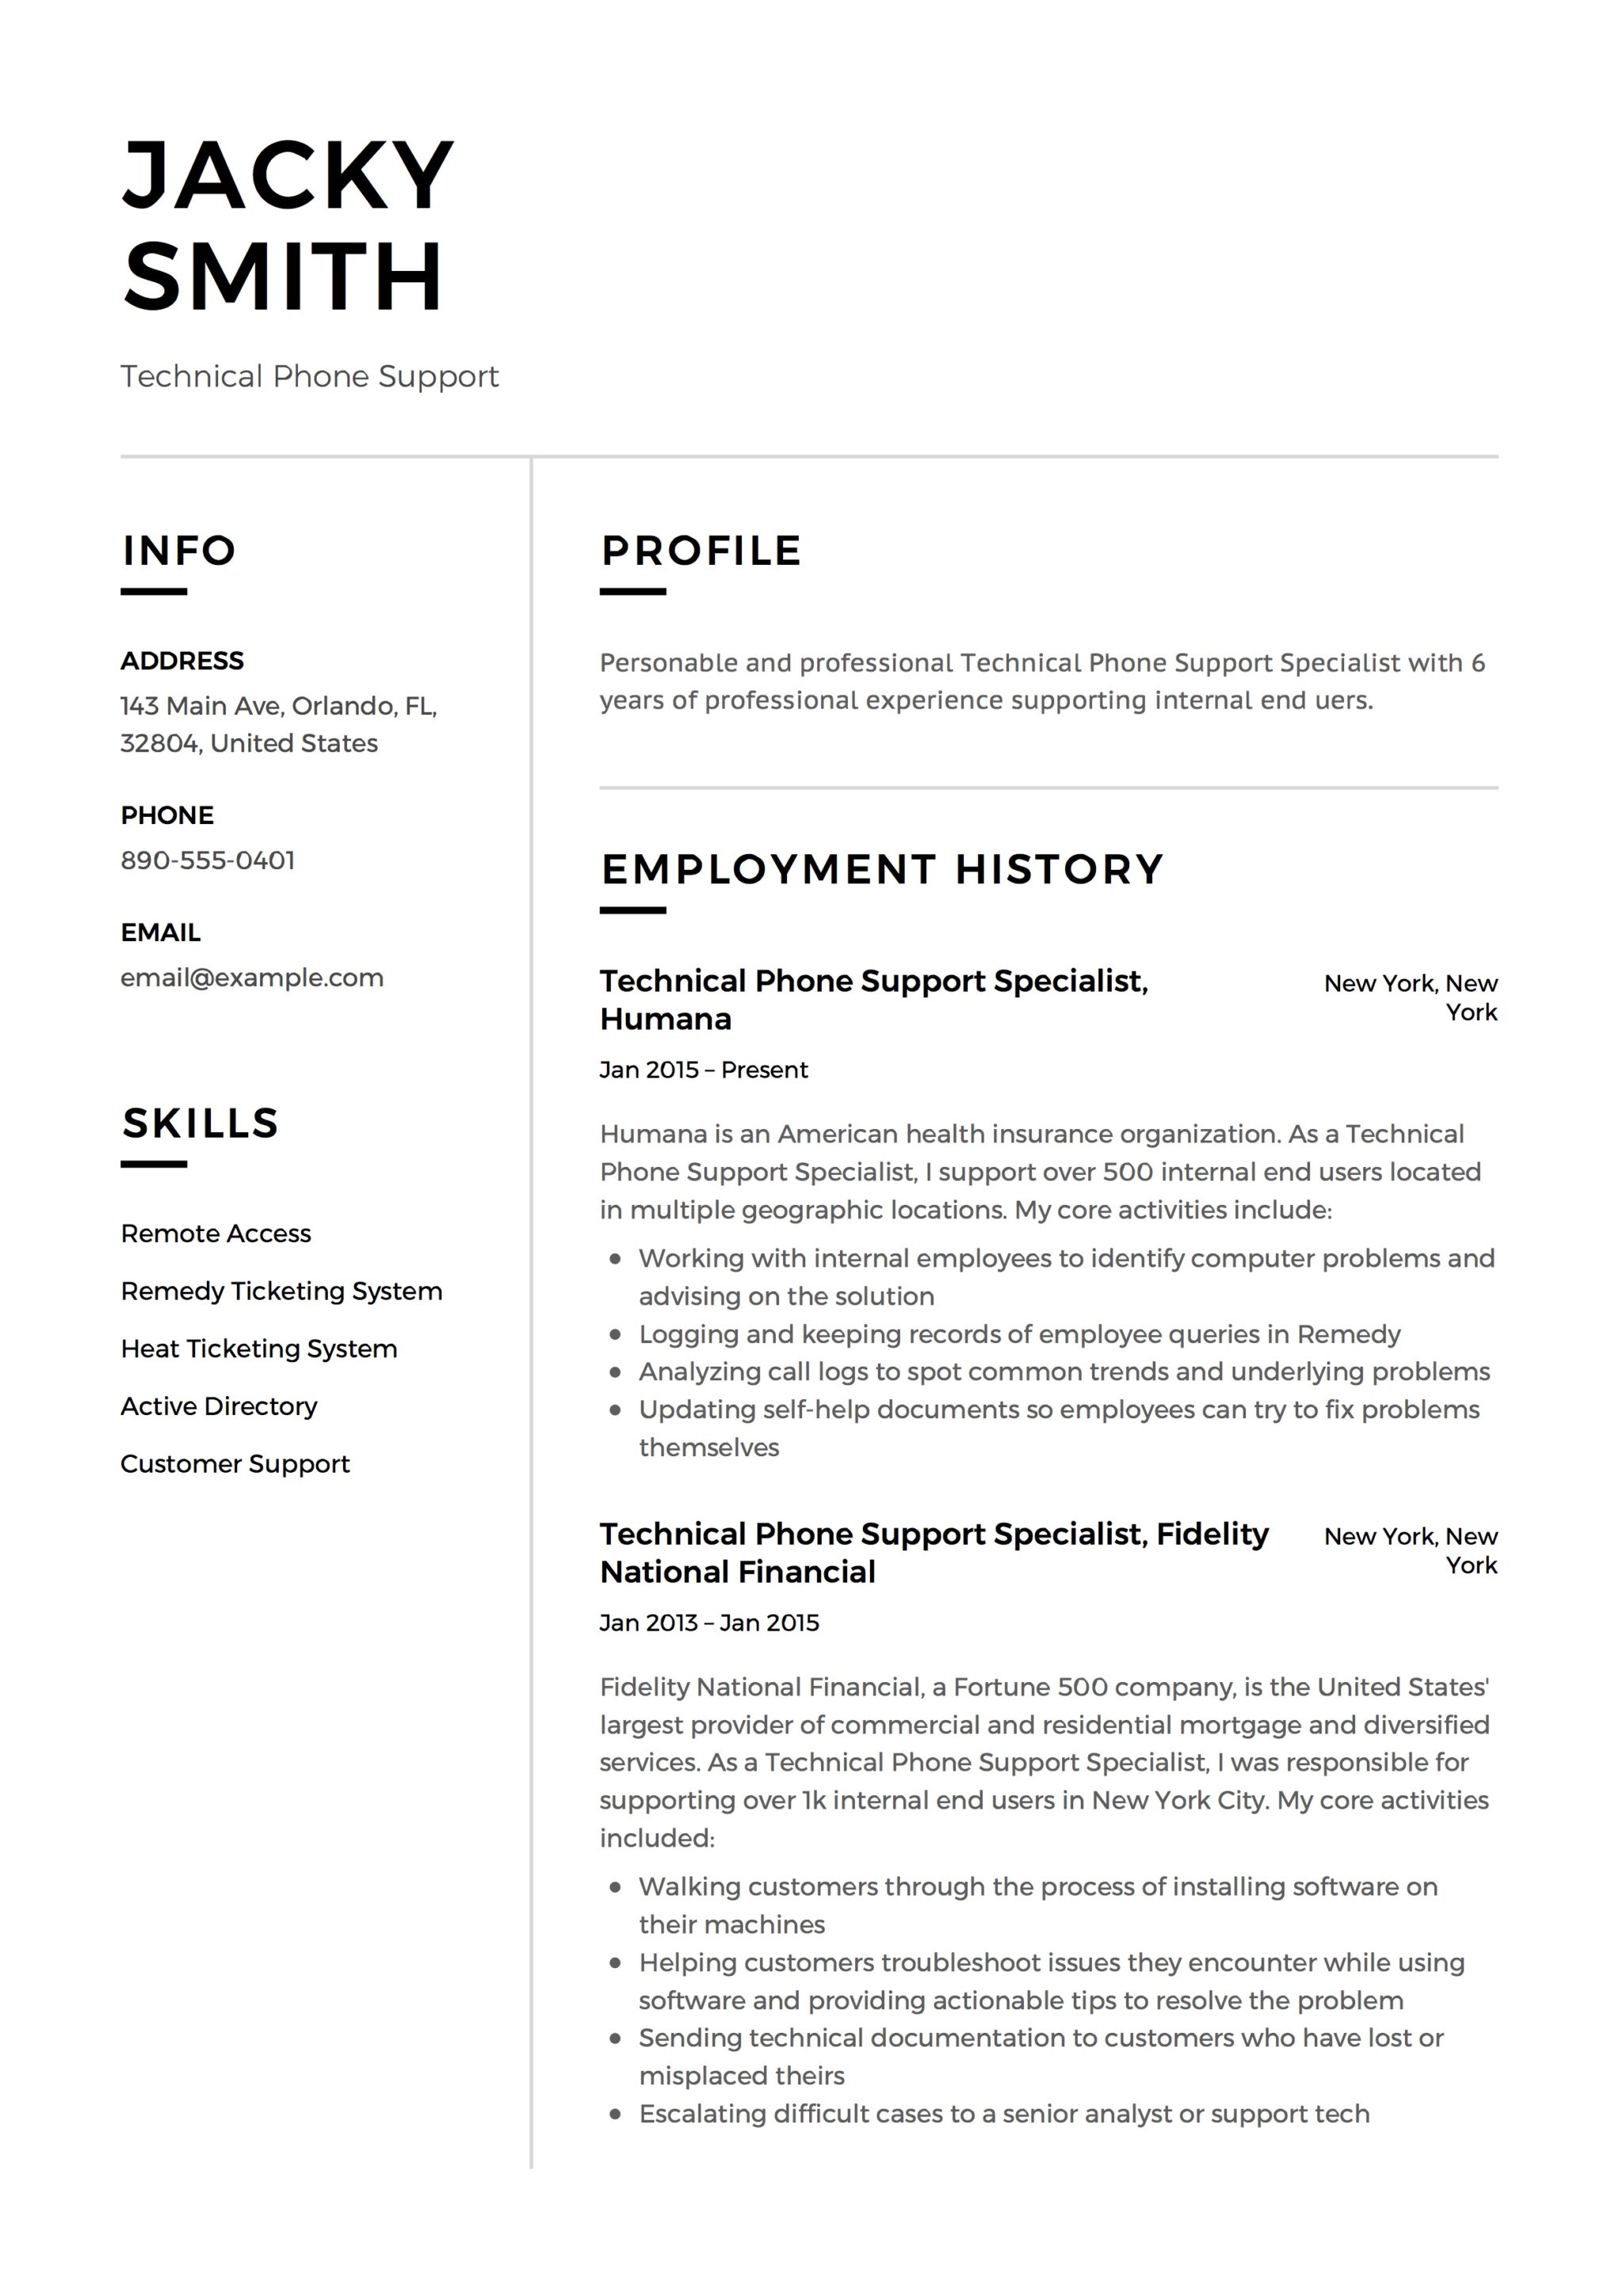 Resume Modern Technical Phone Support